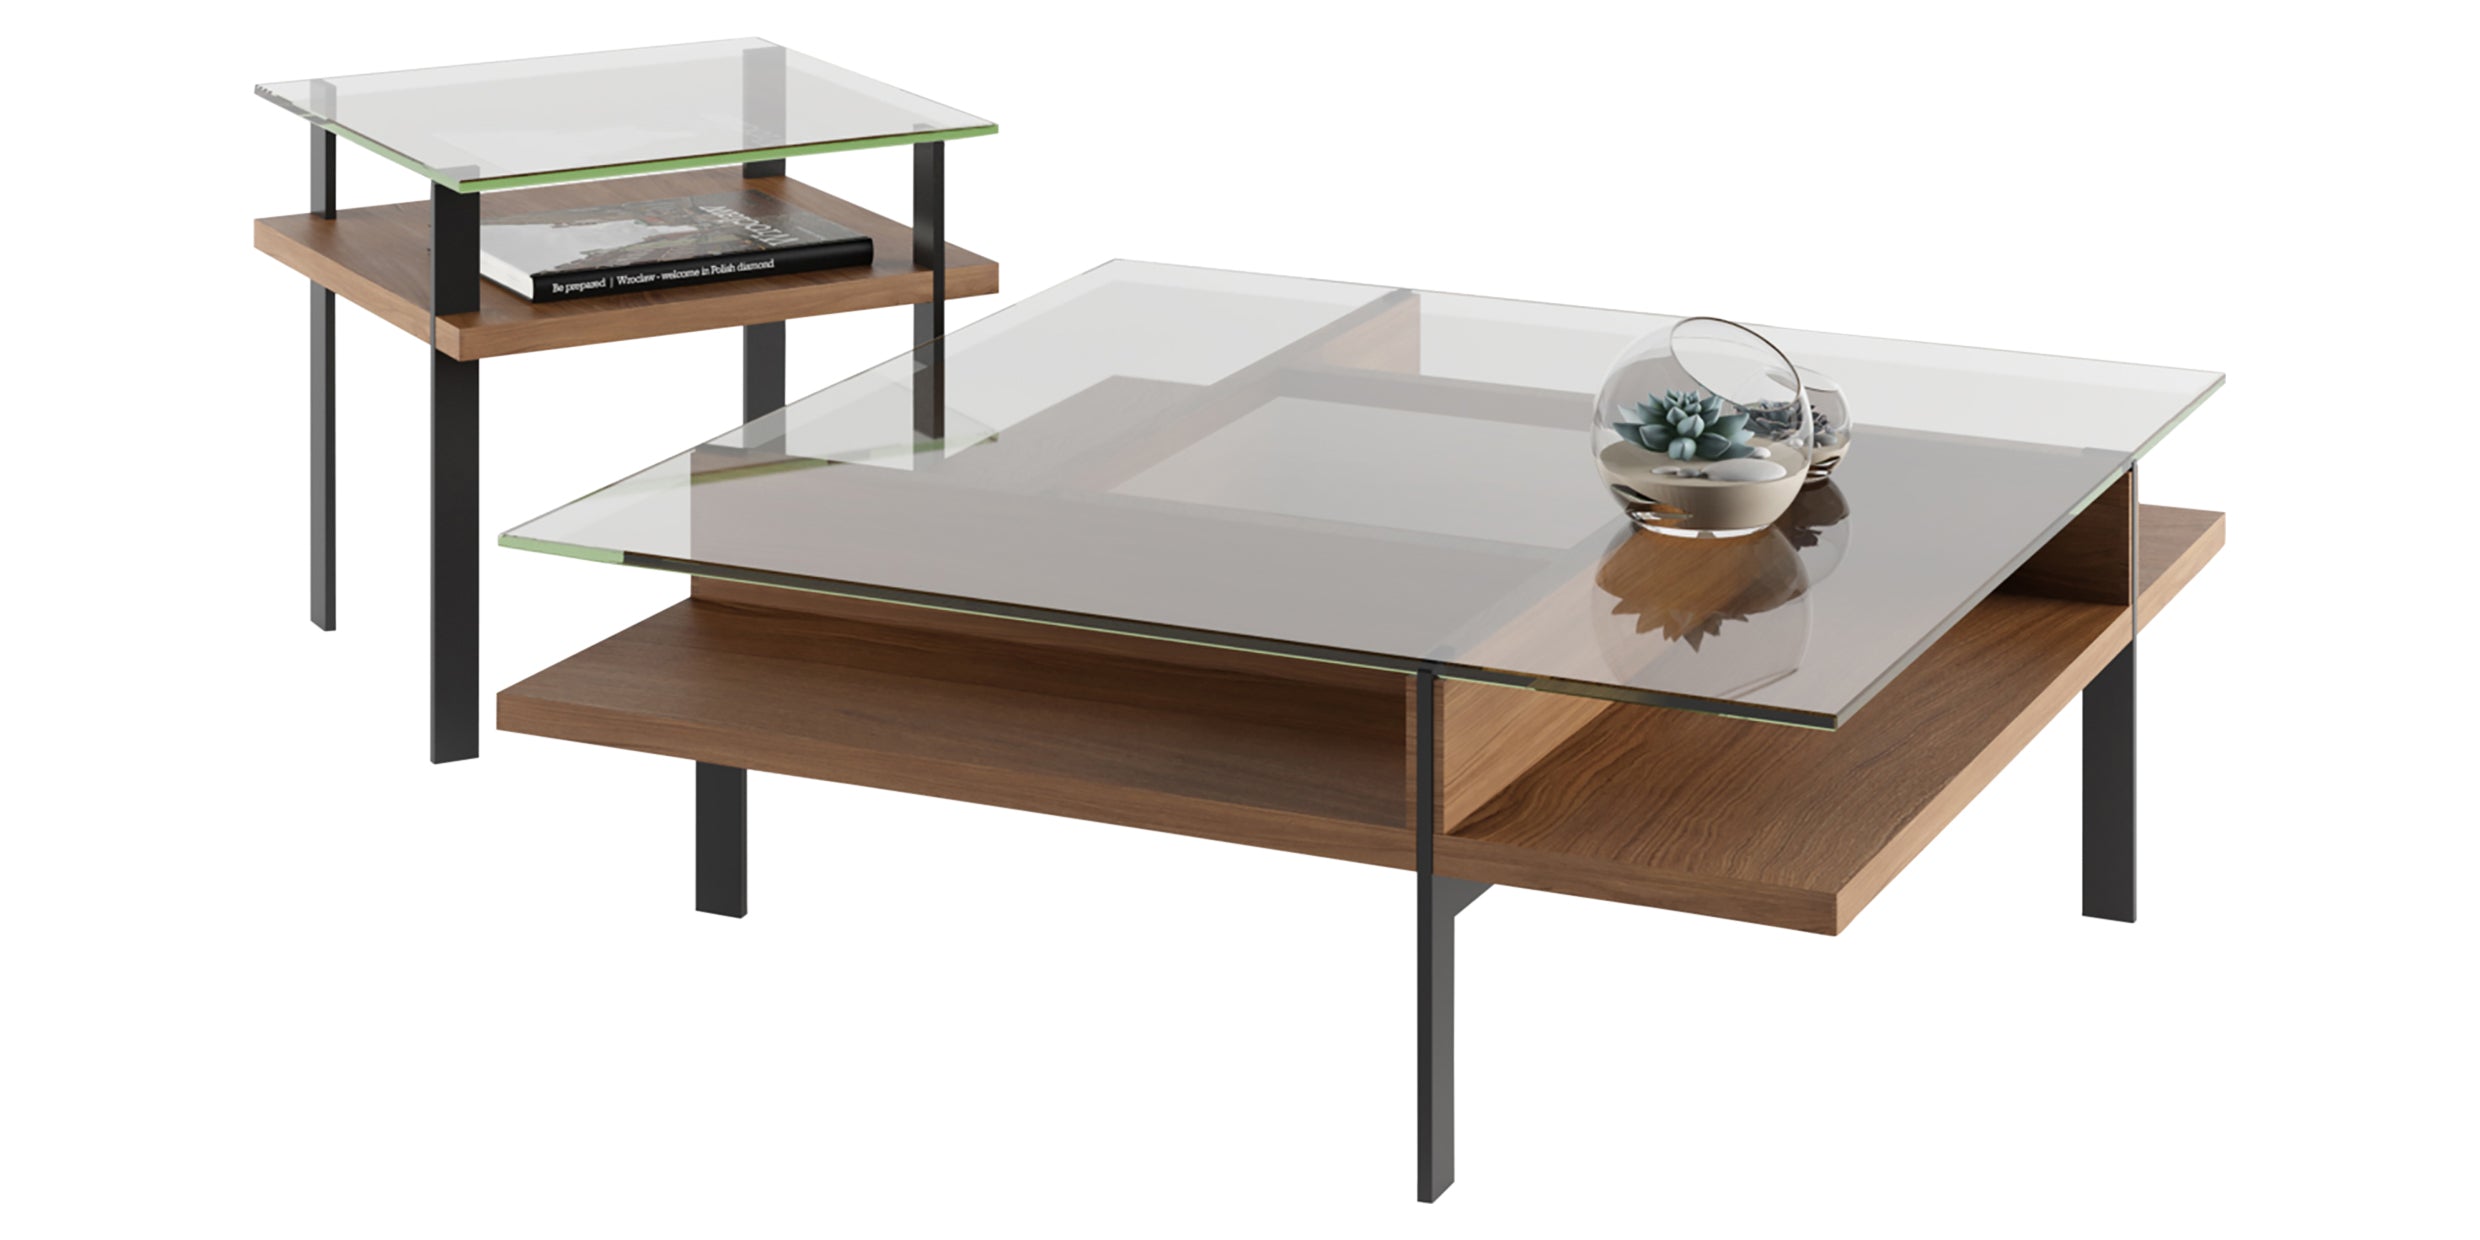 Natural Walnut Veneer & Polished Tempered Glass with Black Aluminum | BDI Terrace End Table | Valley Ridge Furniture